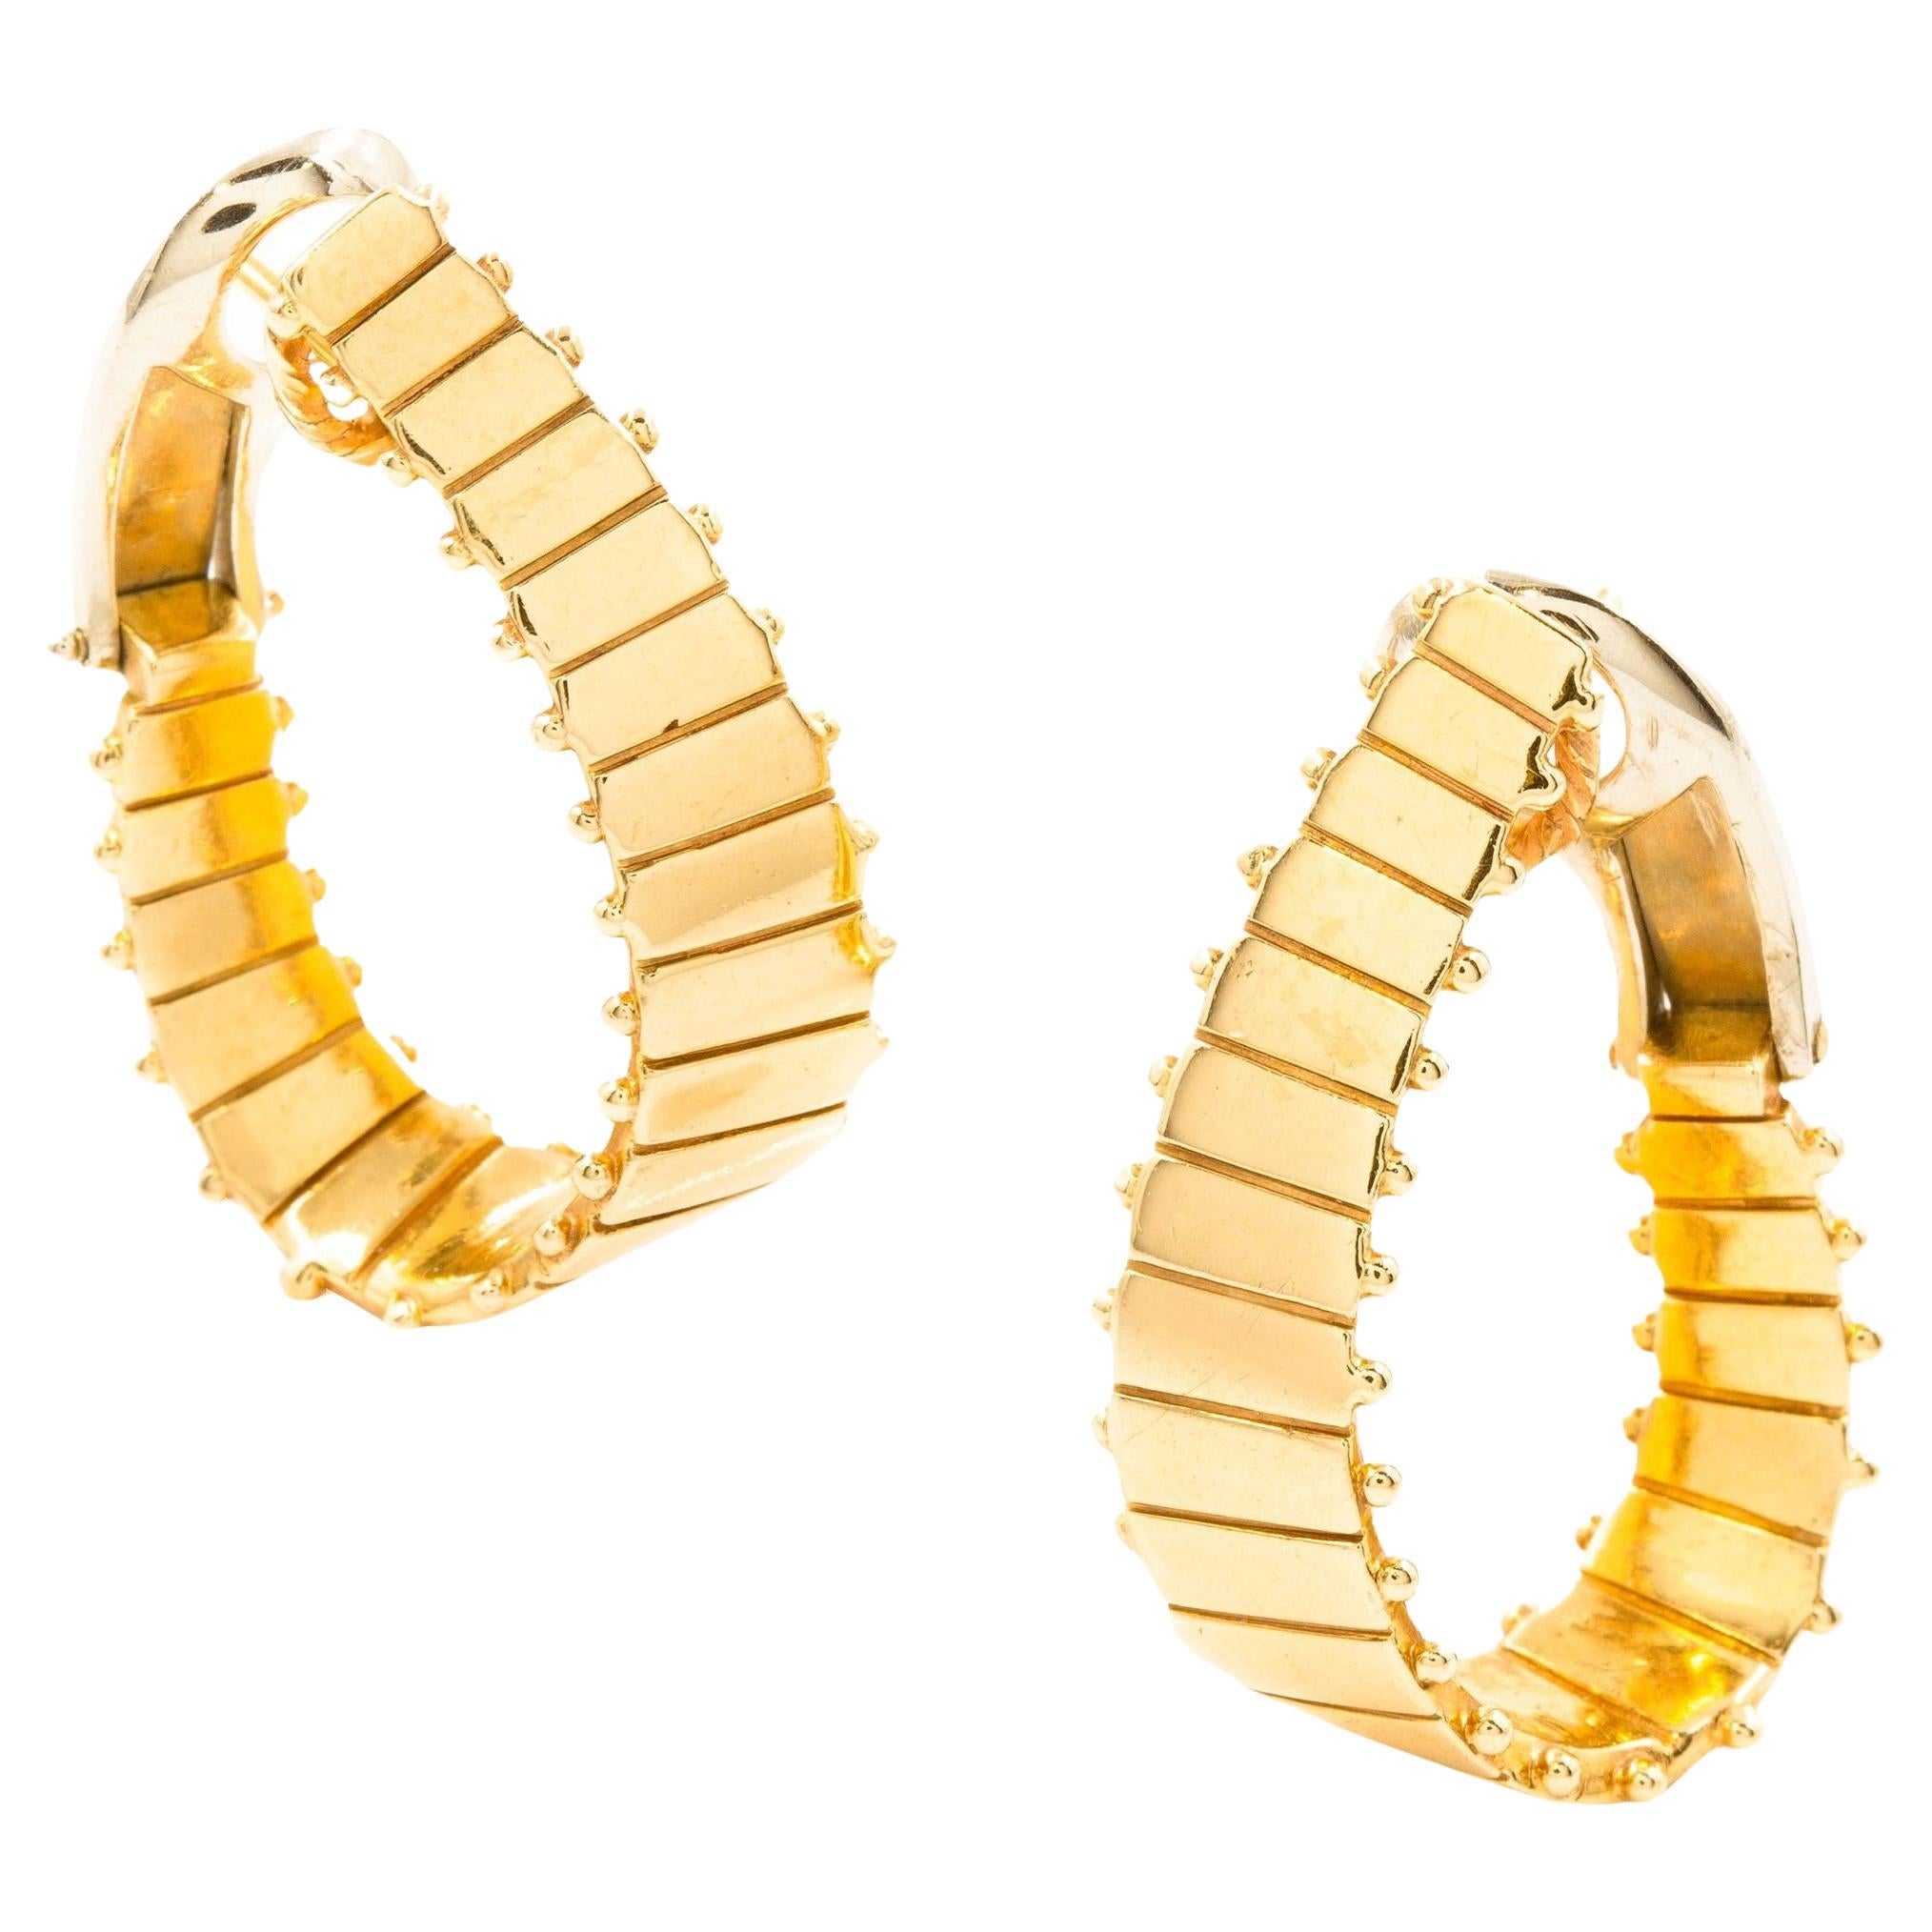 Vintage Pair of 14k Yellow Gold Ridged-Hoop Earrings w/ Omega Clips For Sale